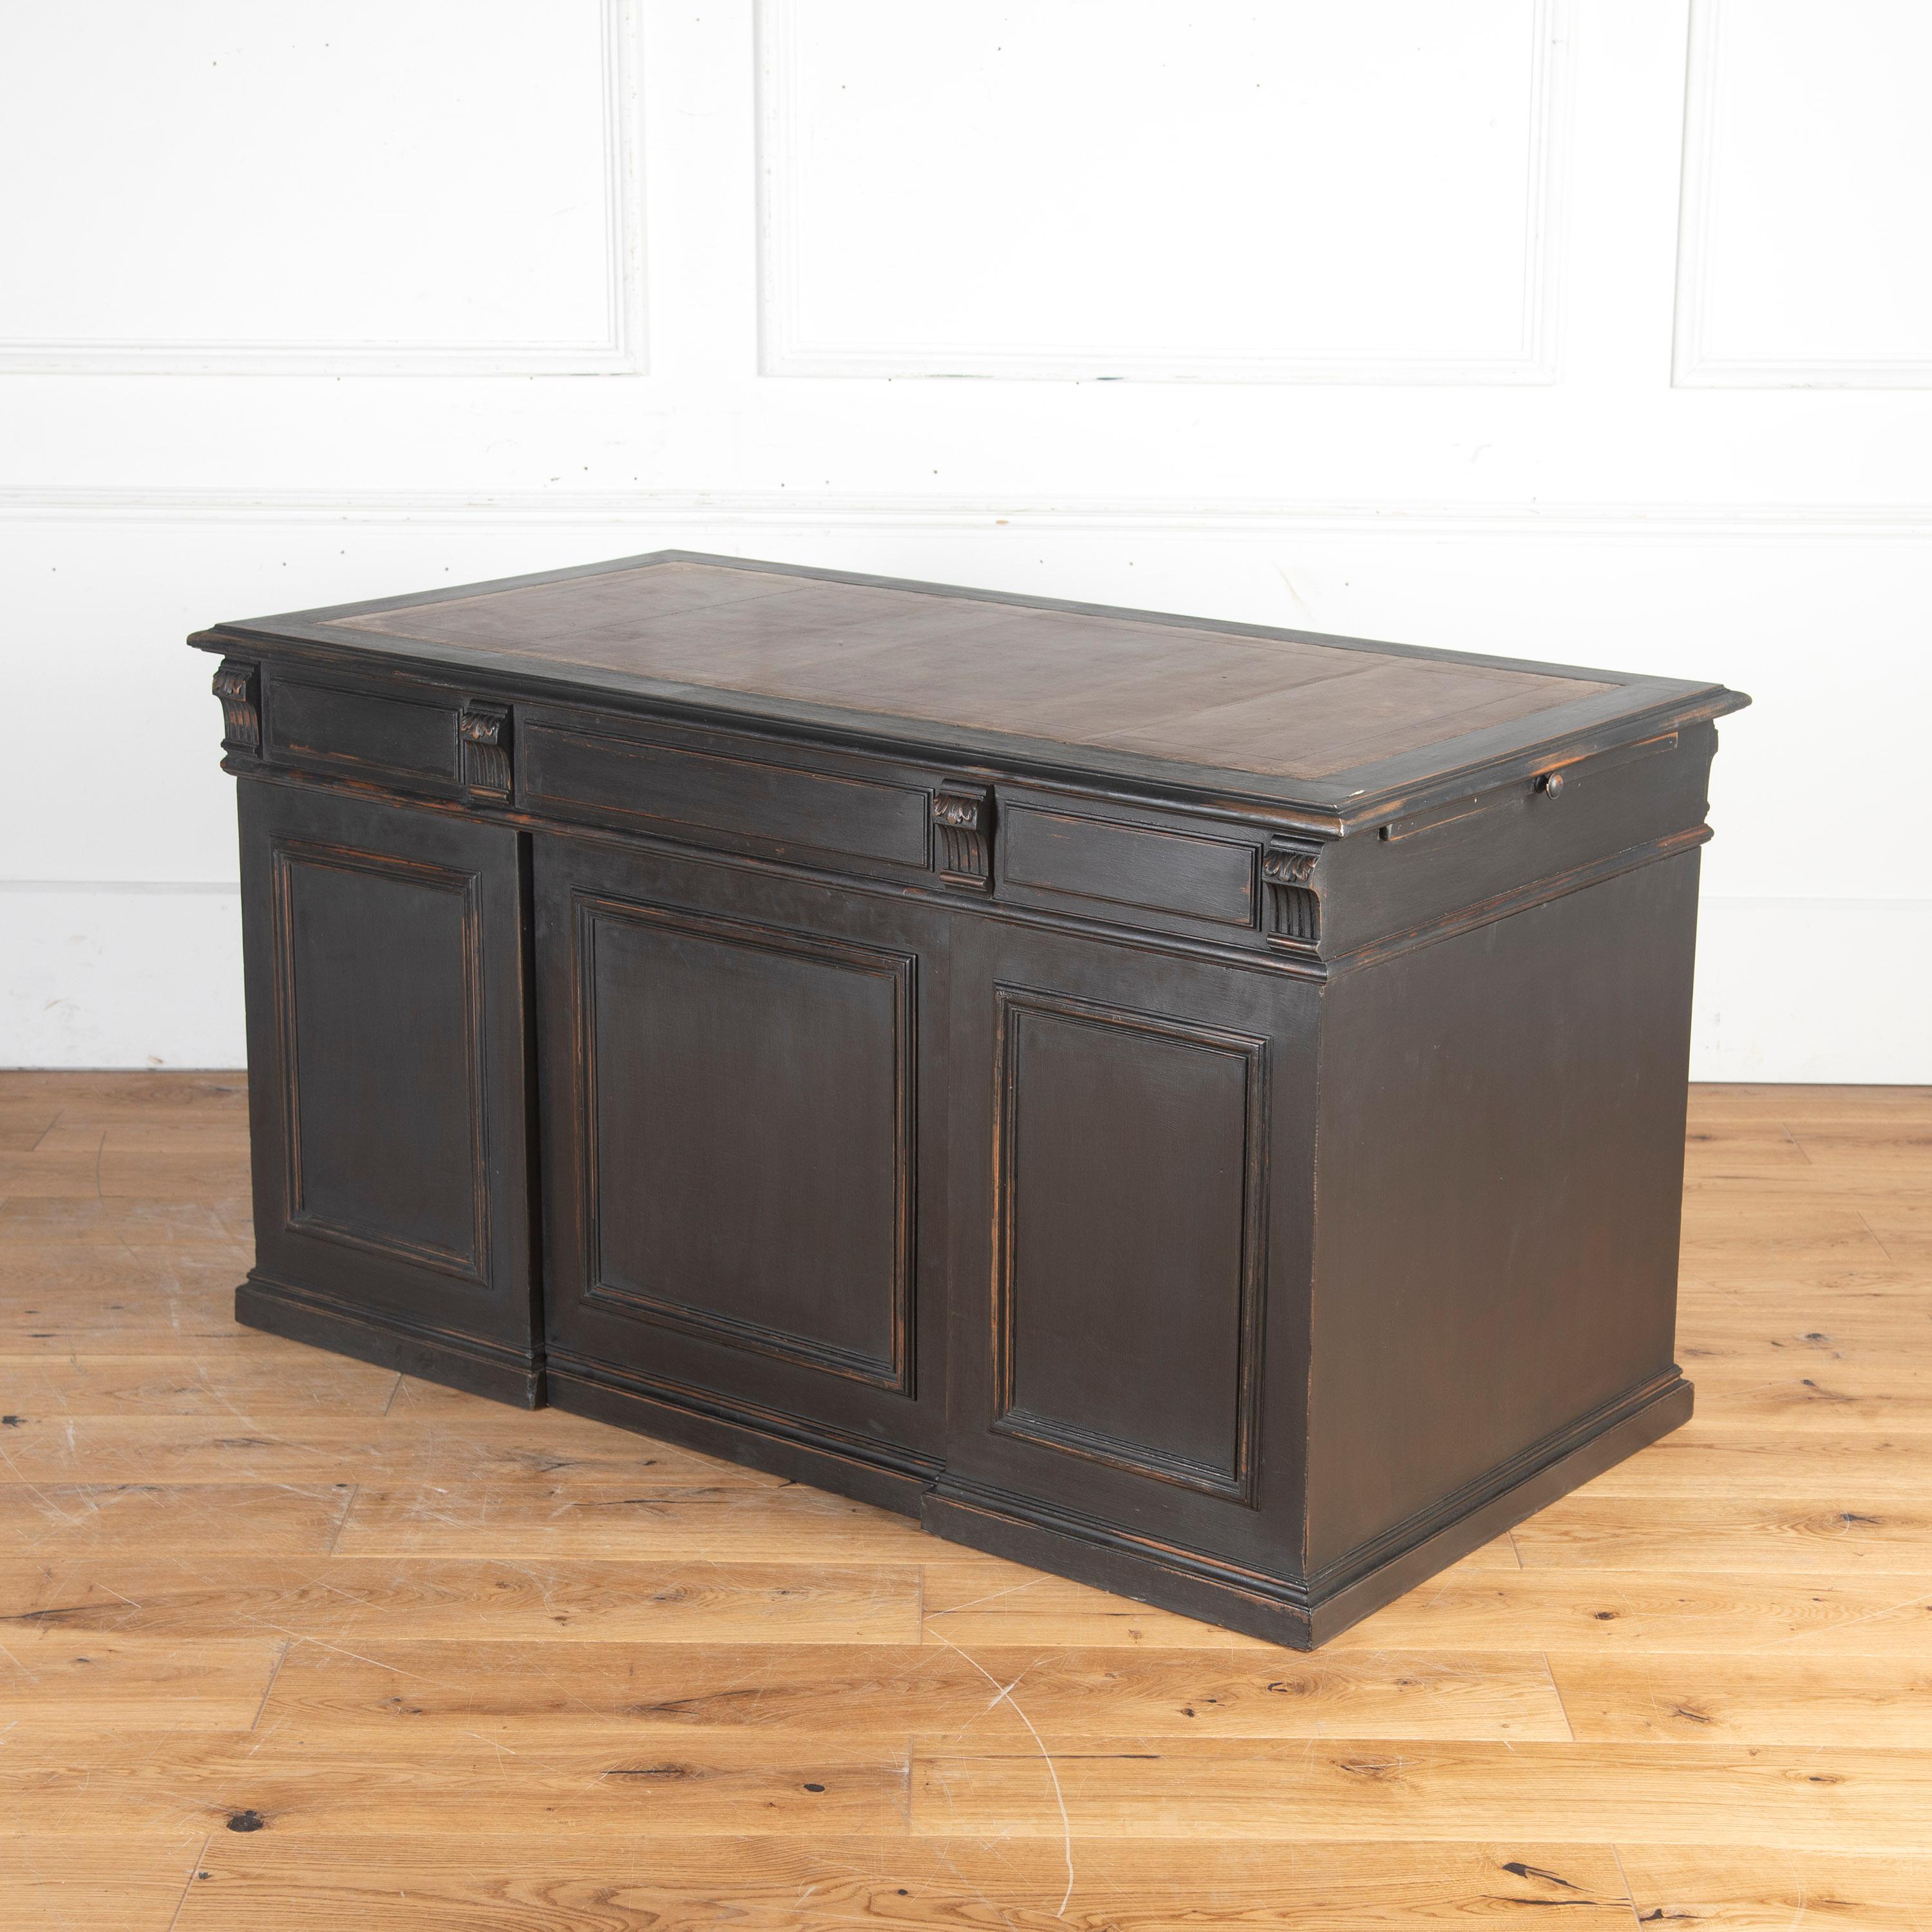 English 19th Century pedestal desk. 

This classic black-painted desk retains its original aged leather brown inset top. 

To one side are drawers and the other panels, so this piece can happily free-stand in a room.

The side with drawers